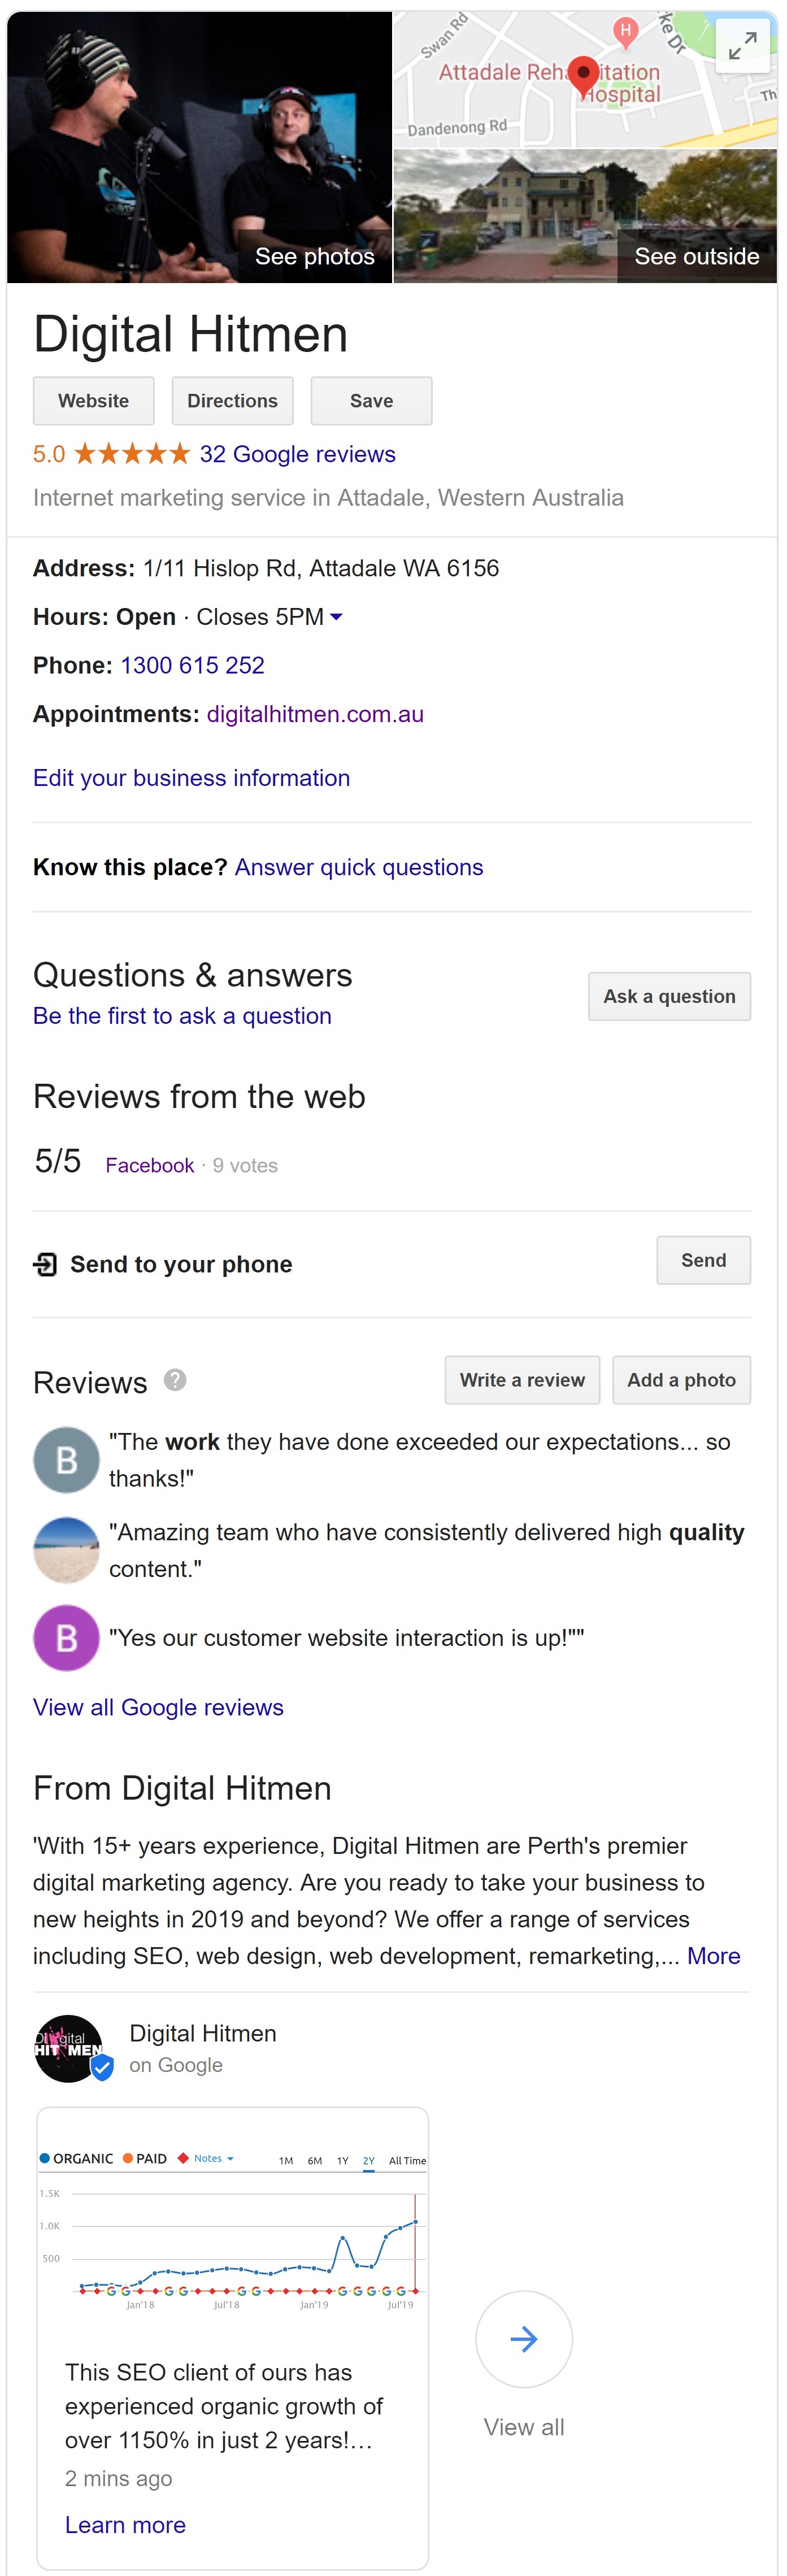 Google My Business is a valuable tool to connect with local customers